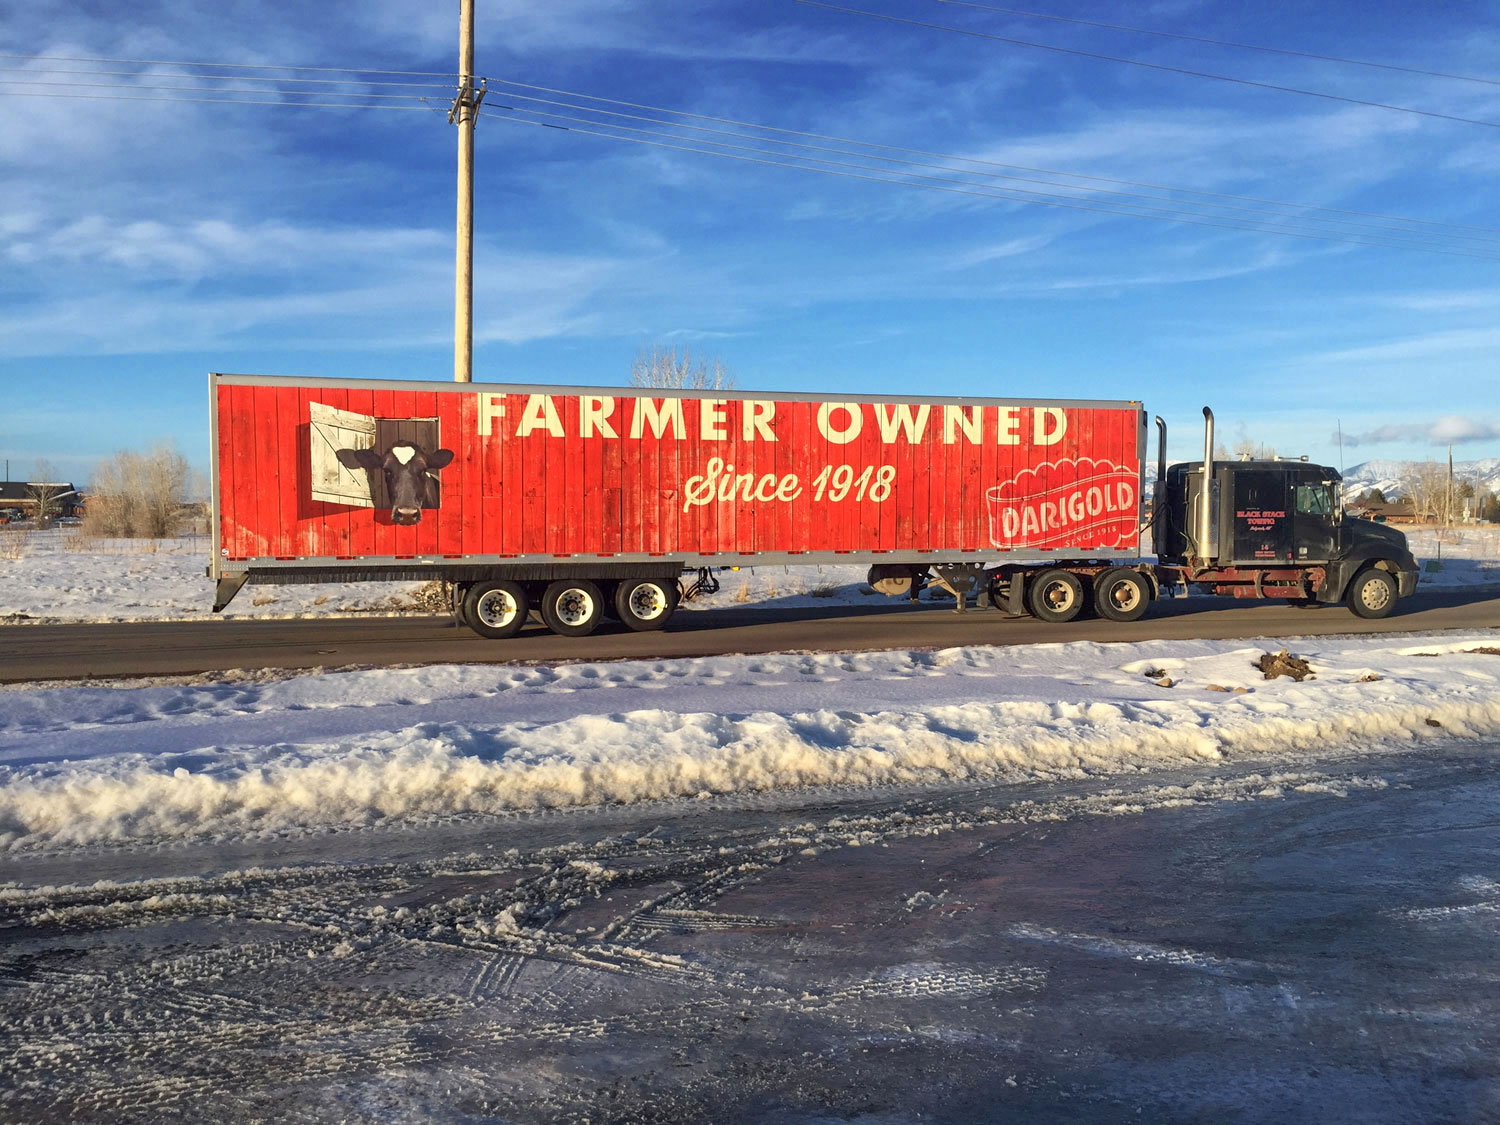 My photo of a barn seen on the side of a Dairgold semi trailer.